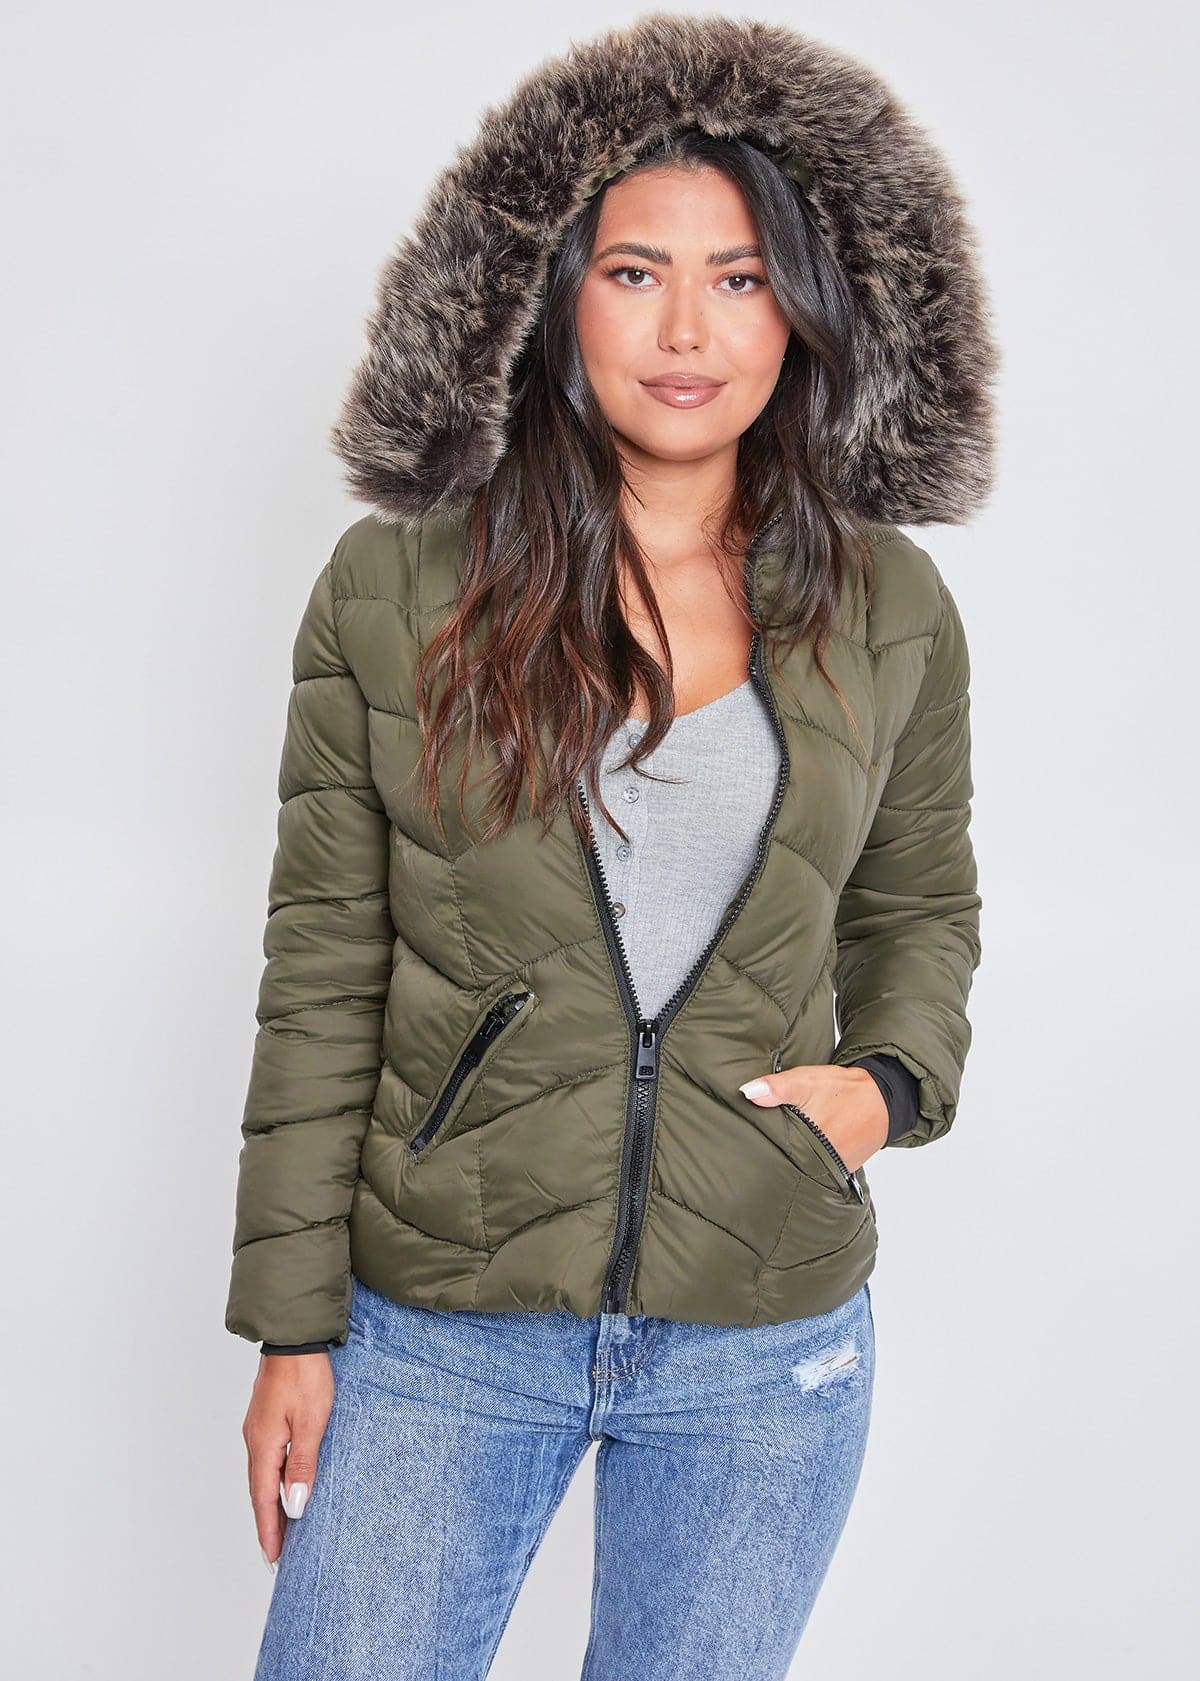 Women's Puffer Jacket With Detachable Faux Fur Hoodie